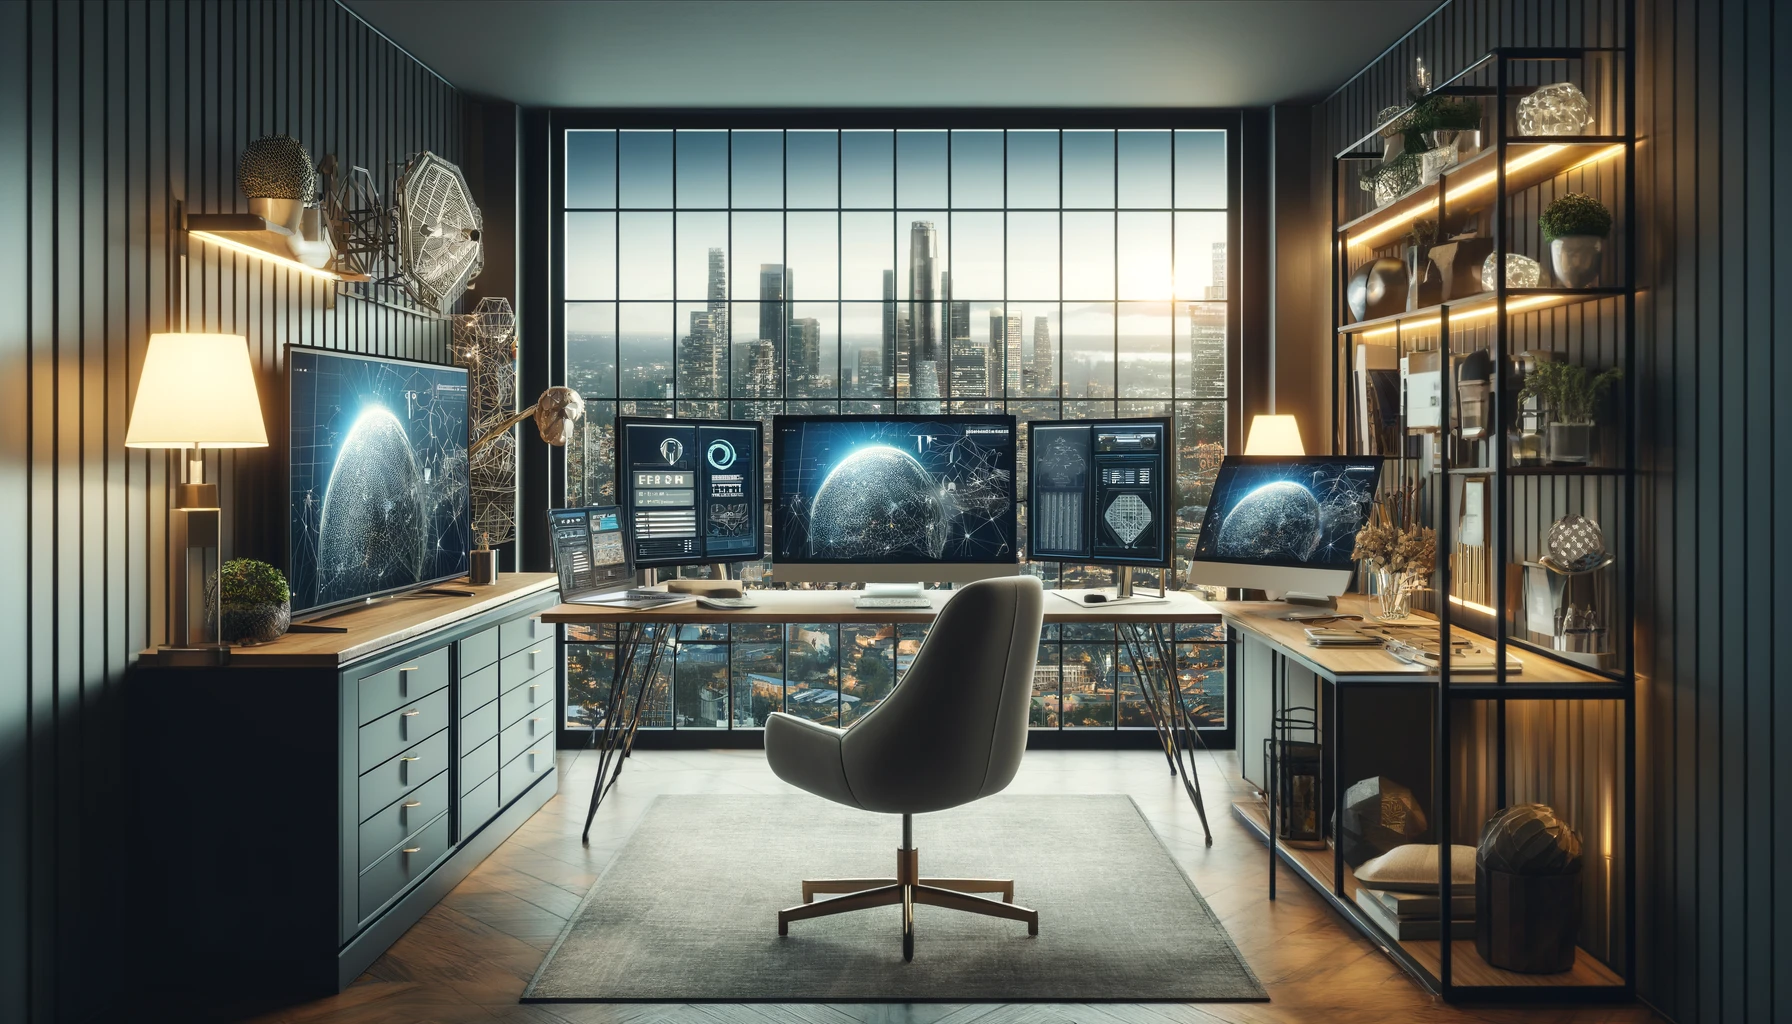 Modern home office in Culver City, CA, showcasing a high-tech workspace with multiple monitors displaying Viasat satellite internet connectivity. The office features a large desk, a comfortable chair, and stylish decor, set against a backdrop of large windows with views of the cityscape. The room's neutral color scheme is enhanced by vibrant decorative elements, illustrating a seamless integration of cutting-edge satellite internet technology in a stylish, functional setting